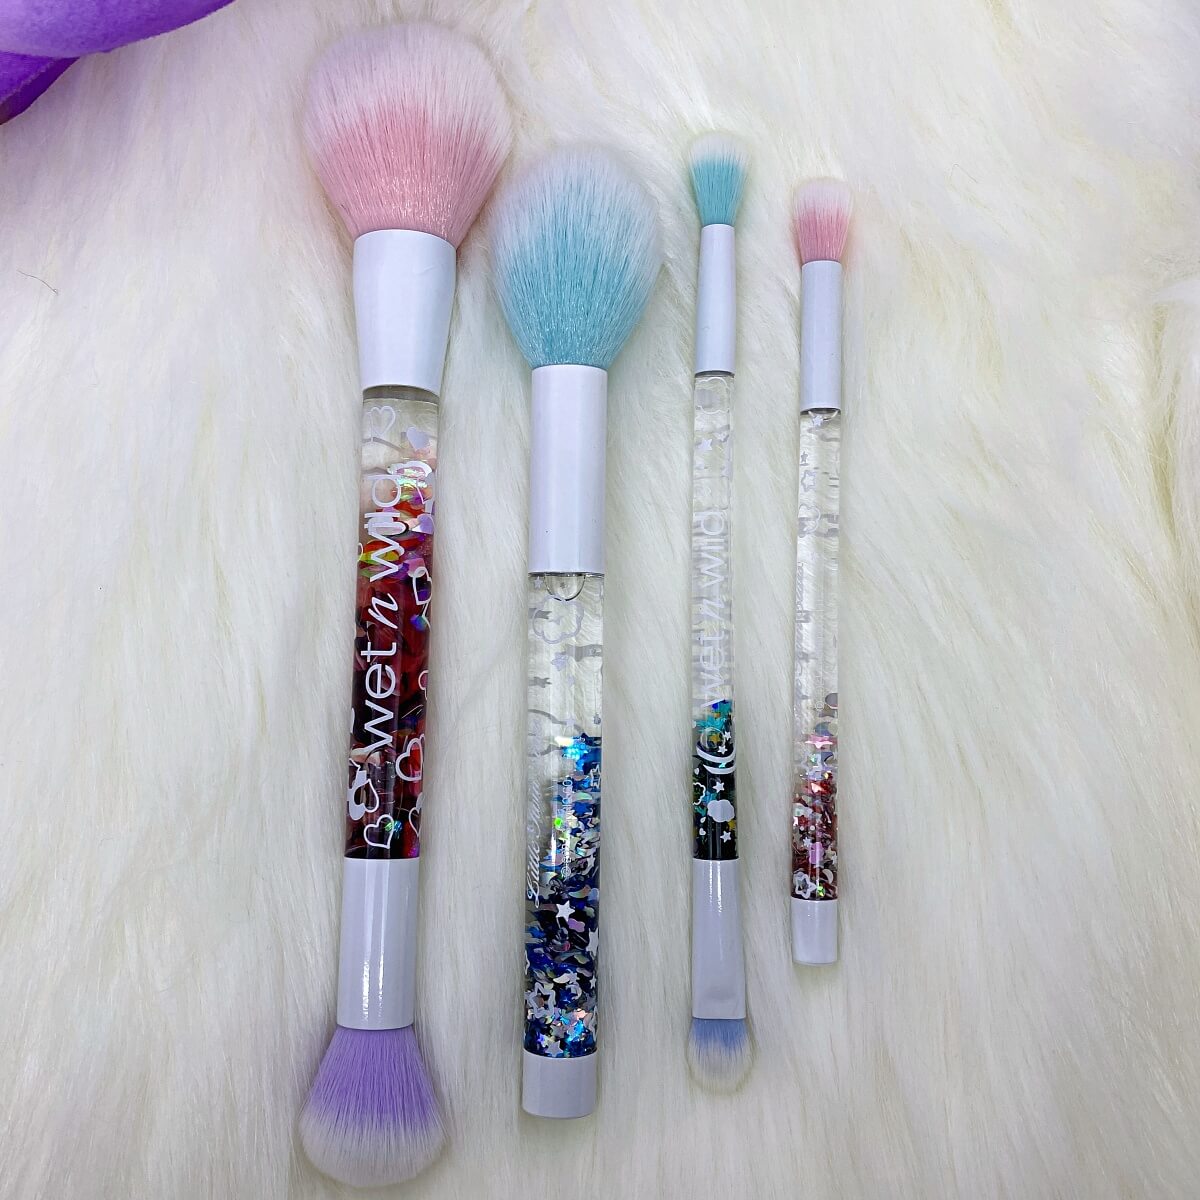 wet n wild Care Bears Sharing is Caring 2-piece Dual-Ended Brush Set compared to Little Twin Stars brushes